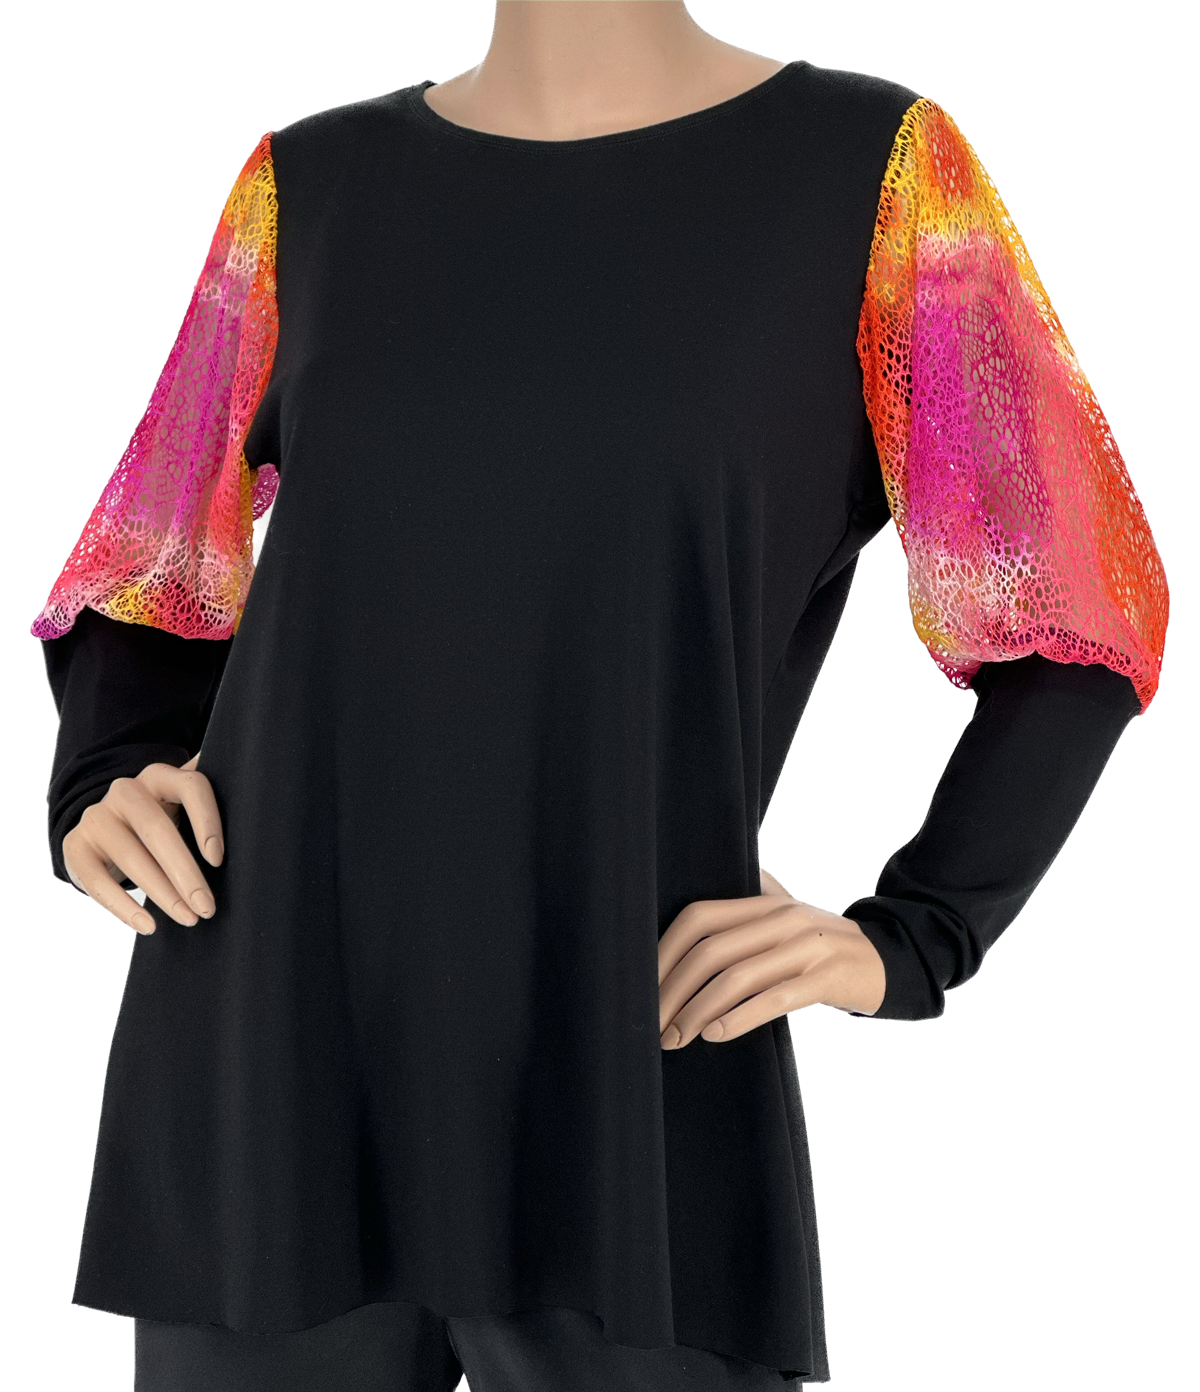 B870 OM Black with Color Sleeve Detail